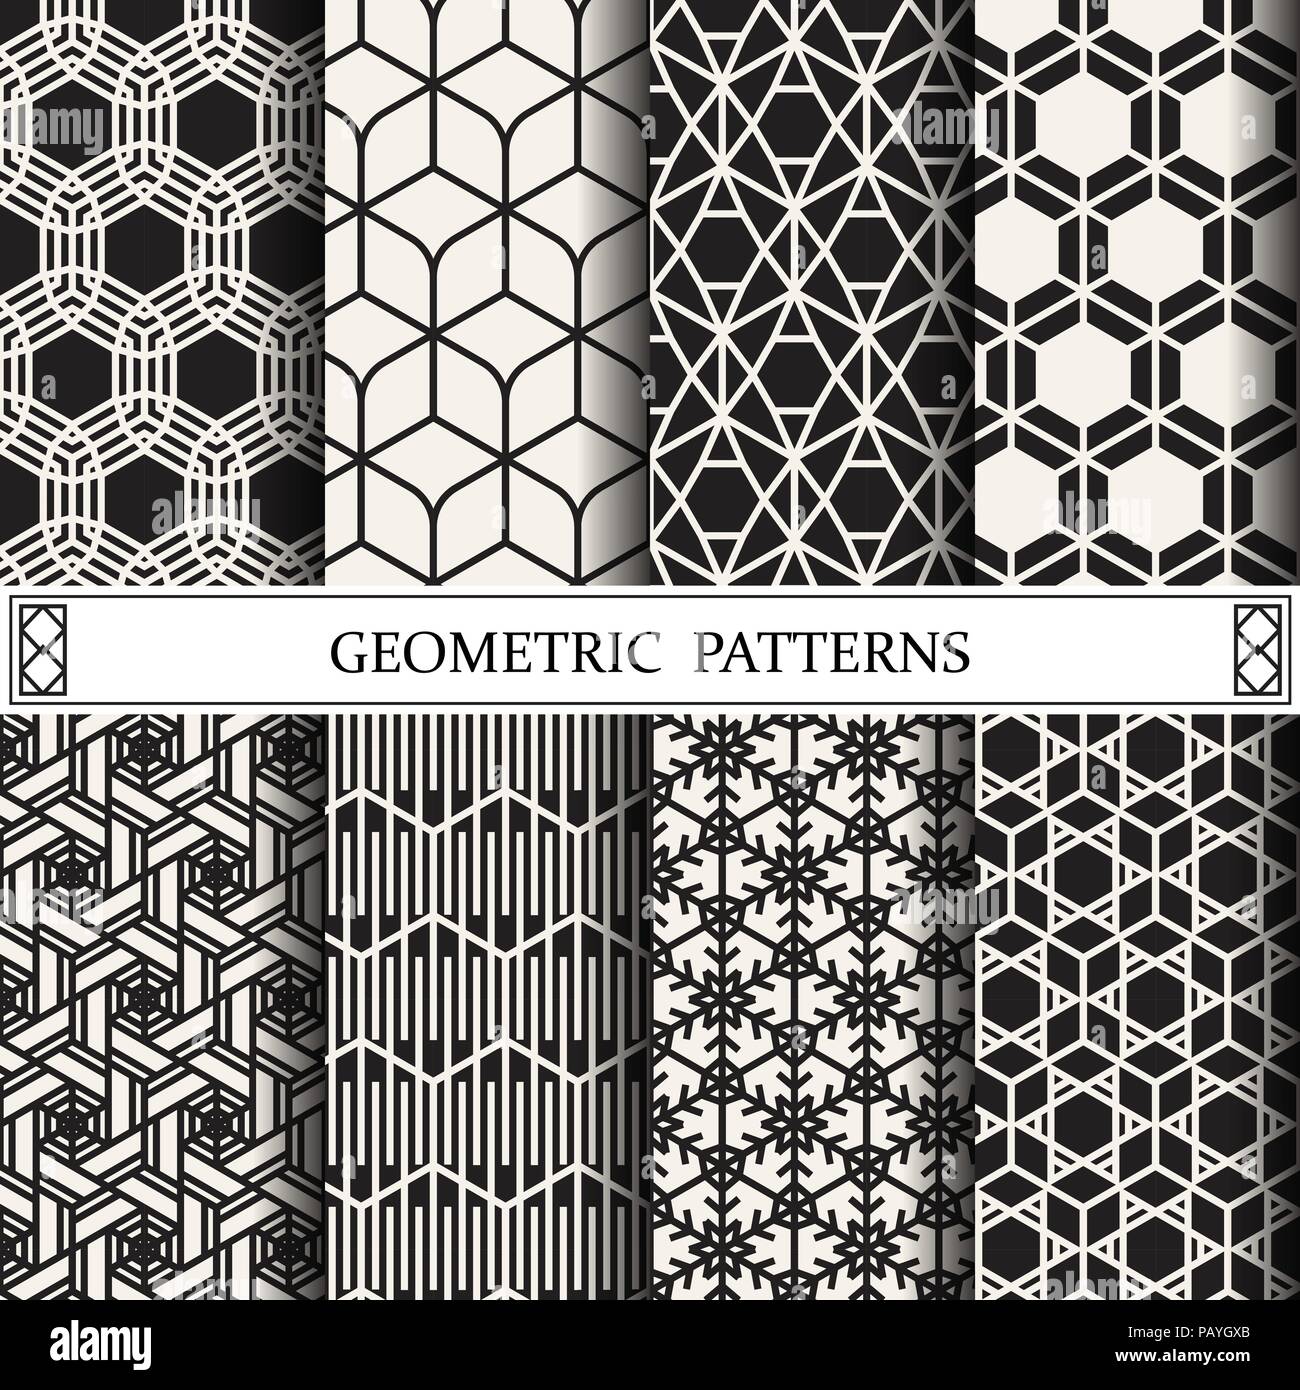 geometric vector pattern,pattern fills, web page background,surface textures Stock Vector